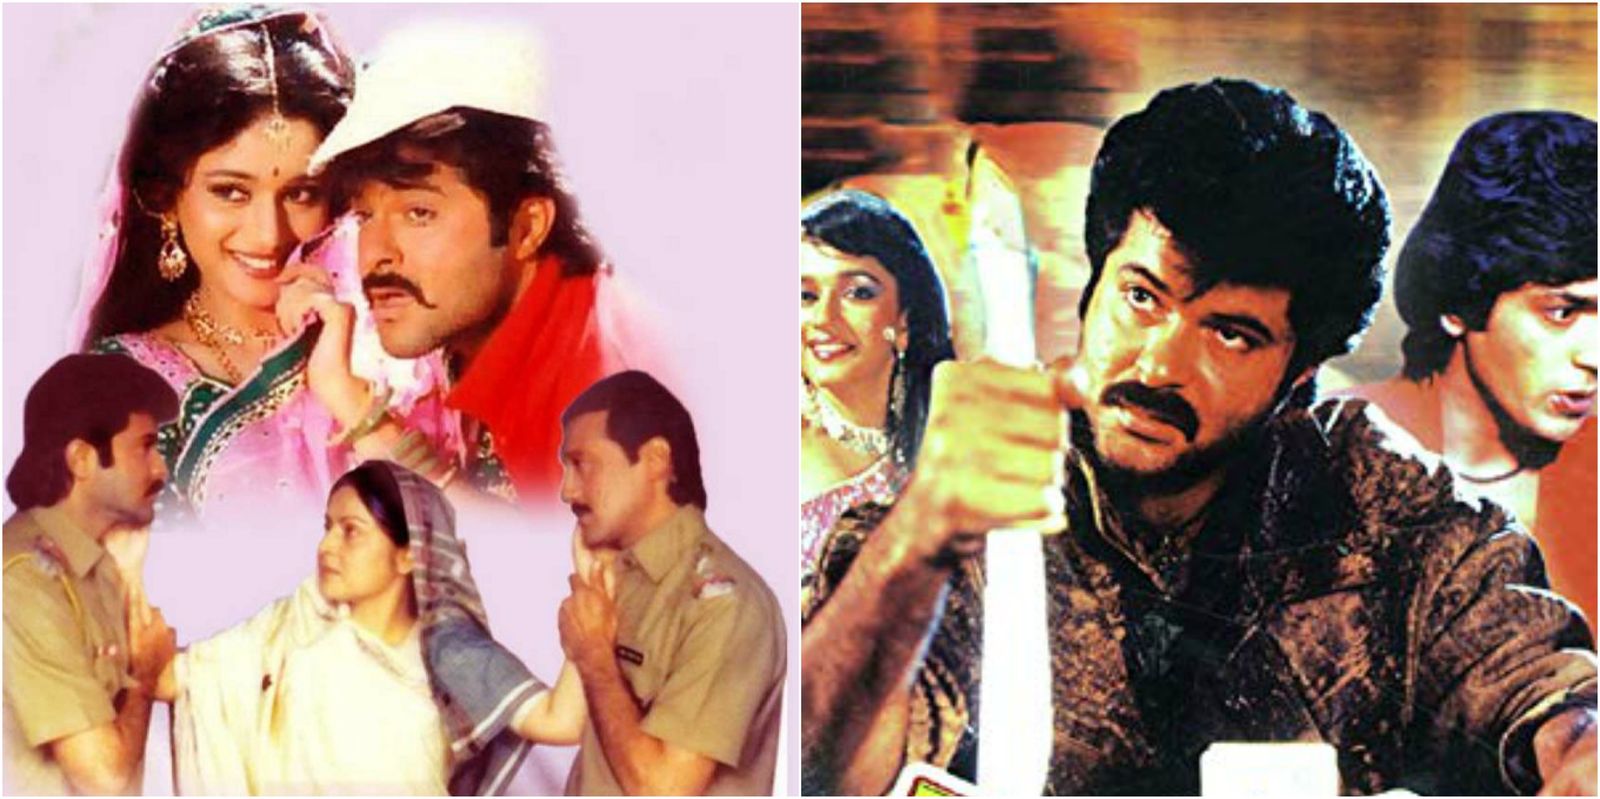 RANKED: 5 Biggest Hits Of Anil Kapoor And Madhuri Dixit After Adjusting For Inflation